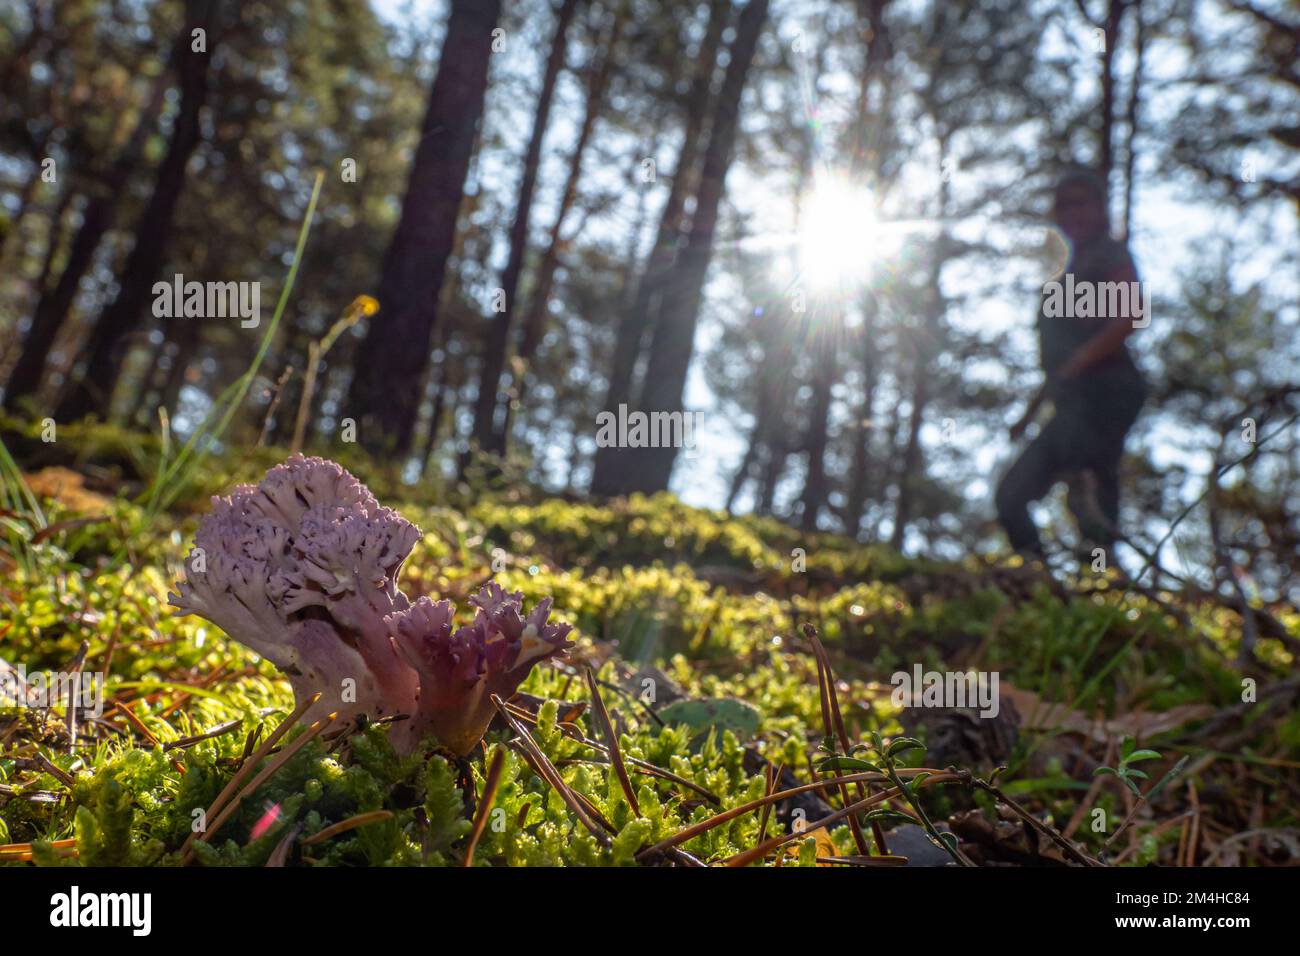 Beautiful colorful coral mushroom growing wild in the forest Stock Photo